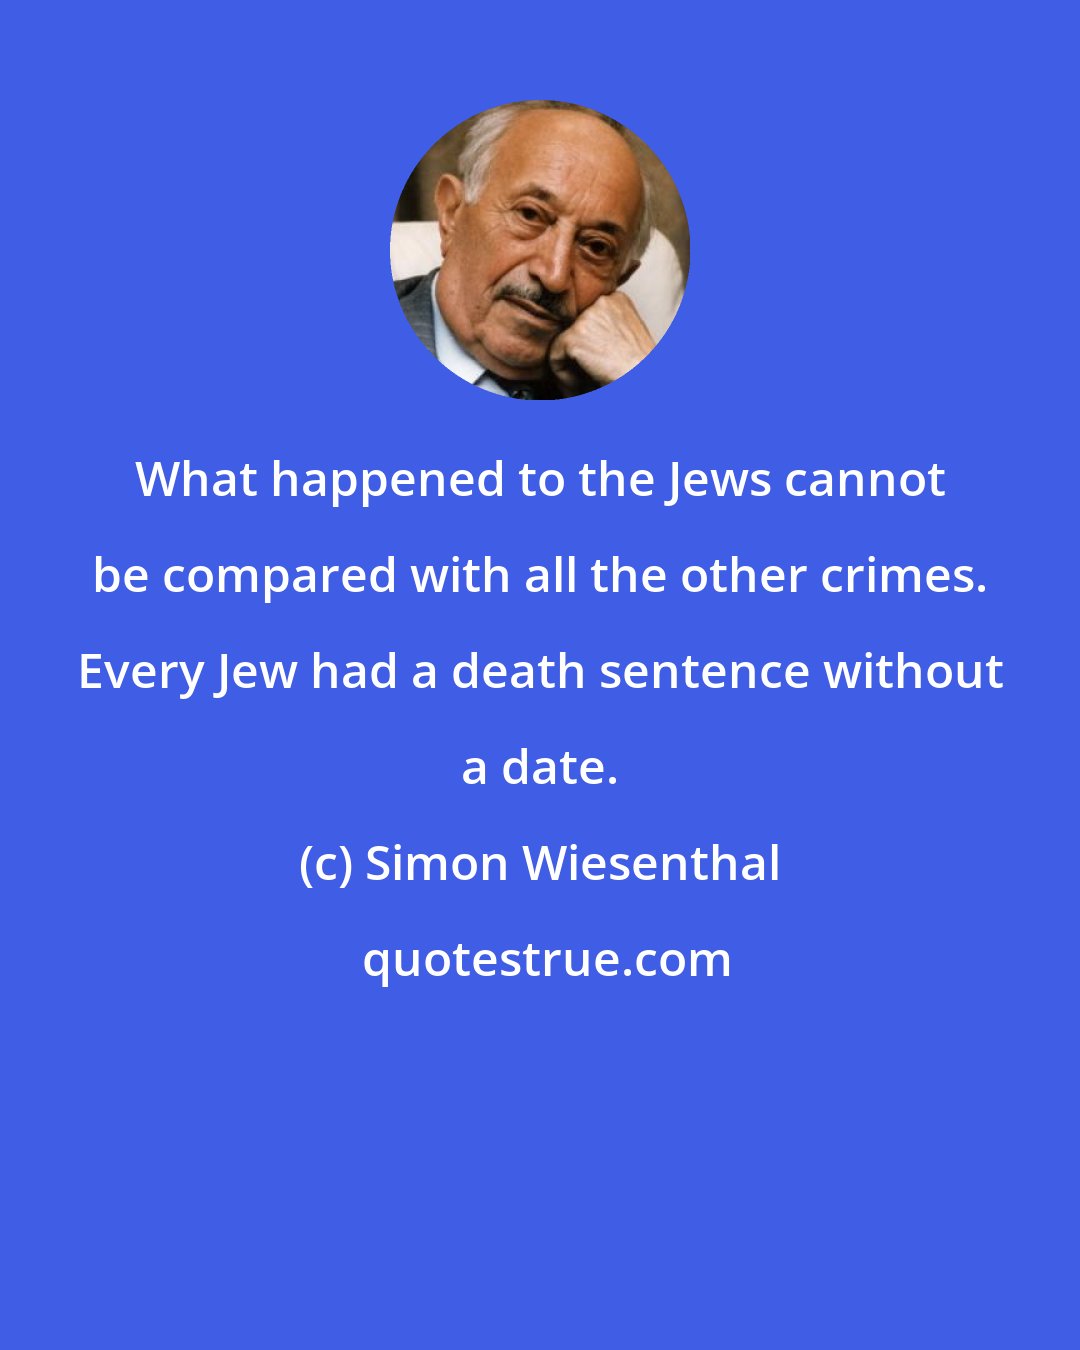 Simon Wiesenthal: What happened to the Jews cannot be compared with all the other crimes. Every Jew had a death sentence without a date.